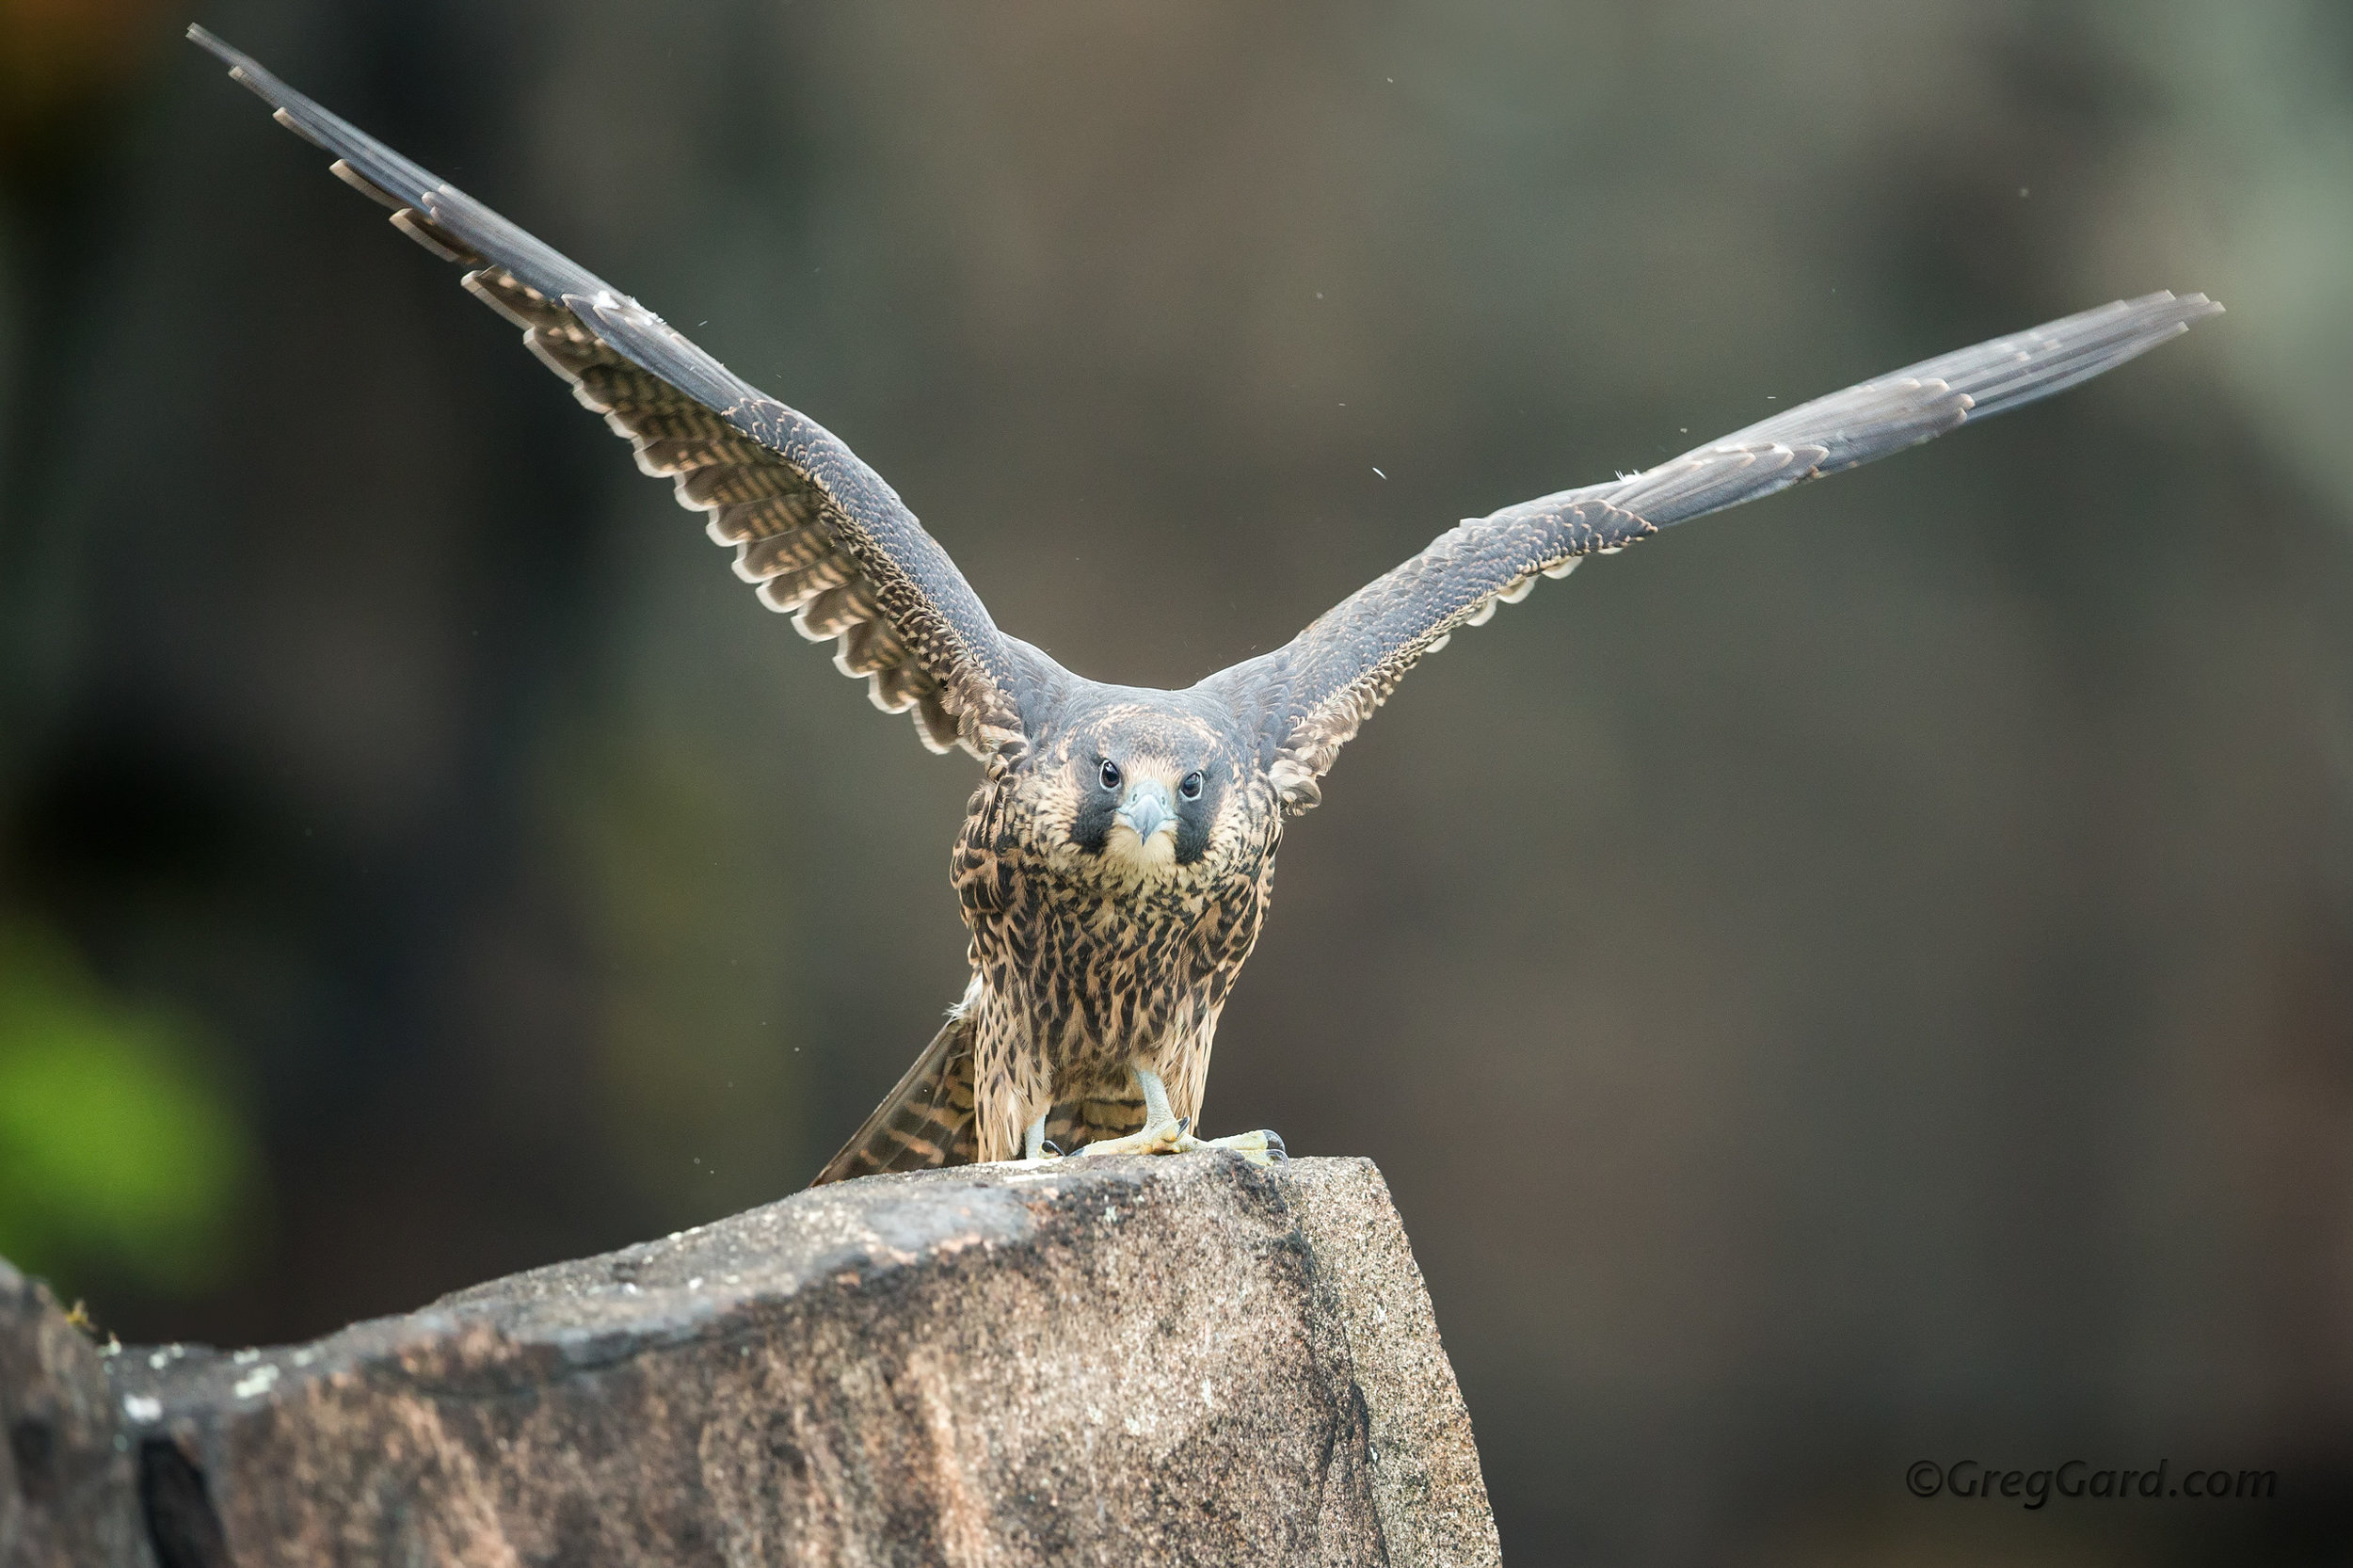 Fledgling Peregrine Falcon flapping its wings